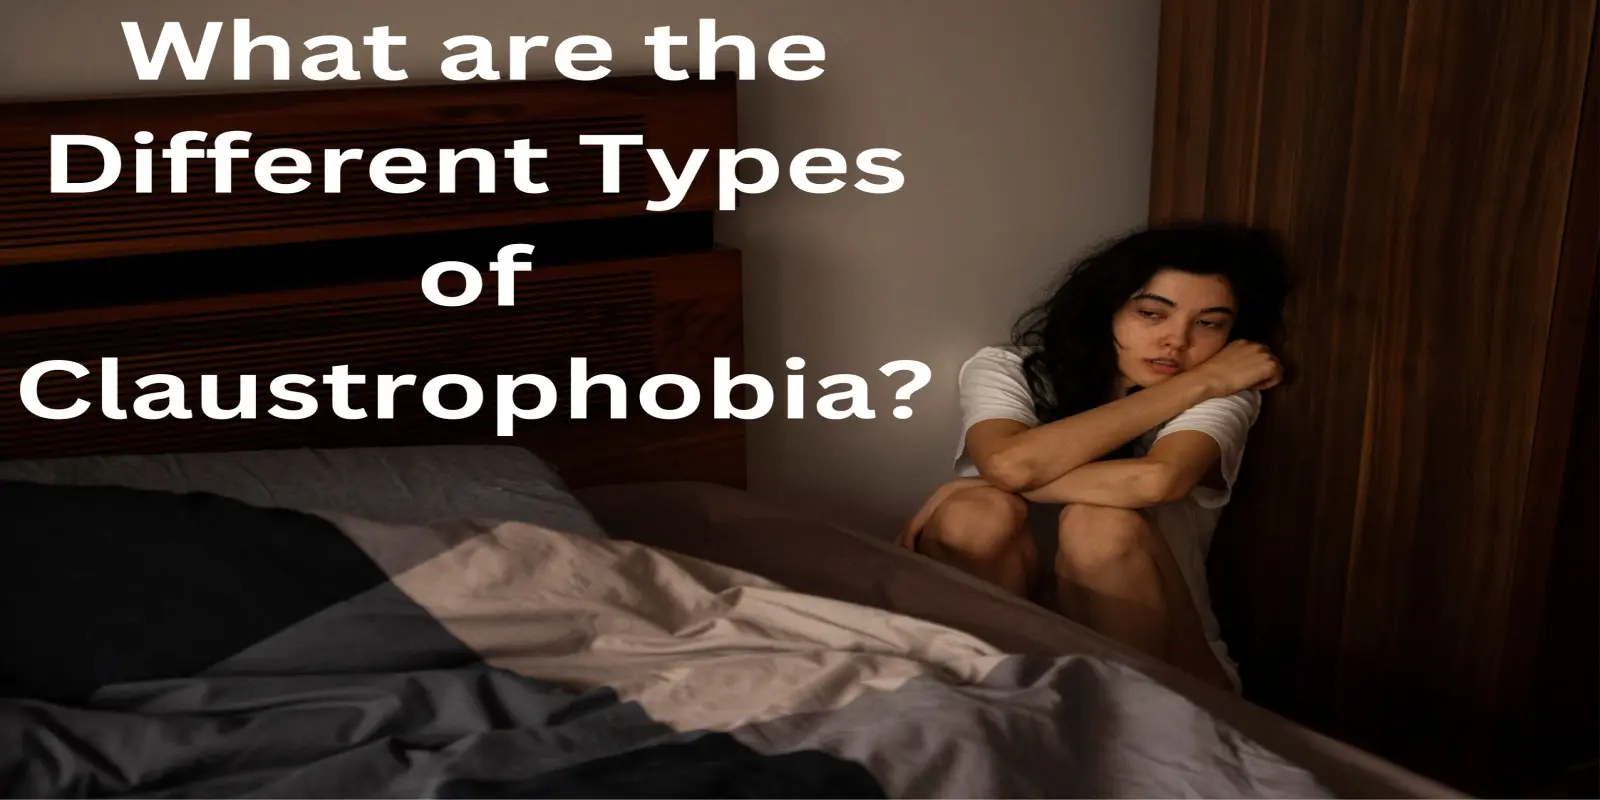 Claustrophobia: What are the Different Types of Claustrophobia?